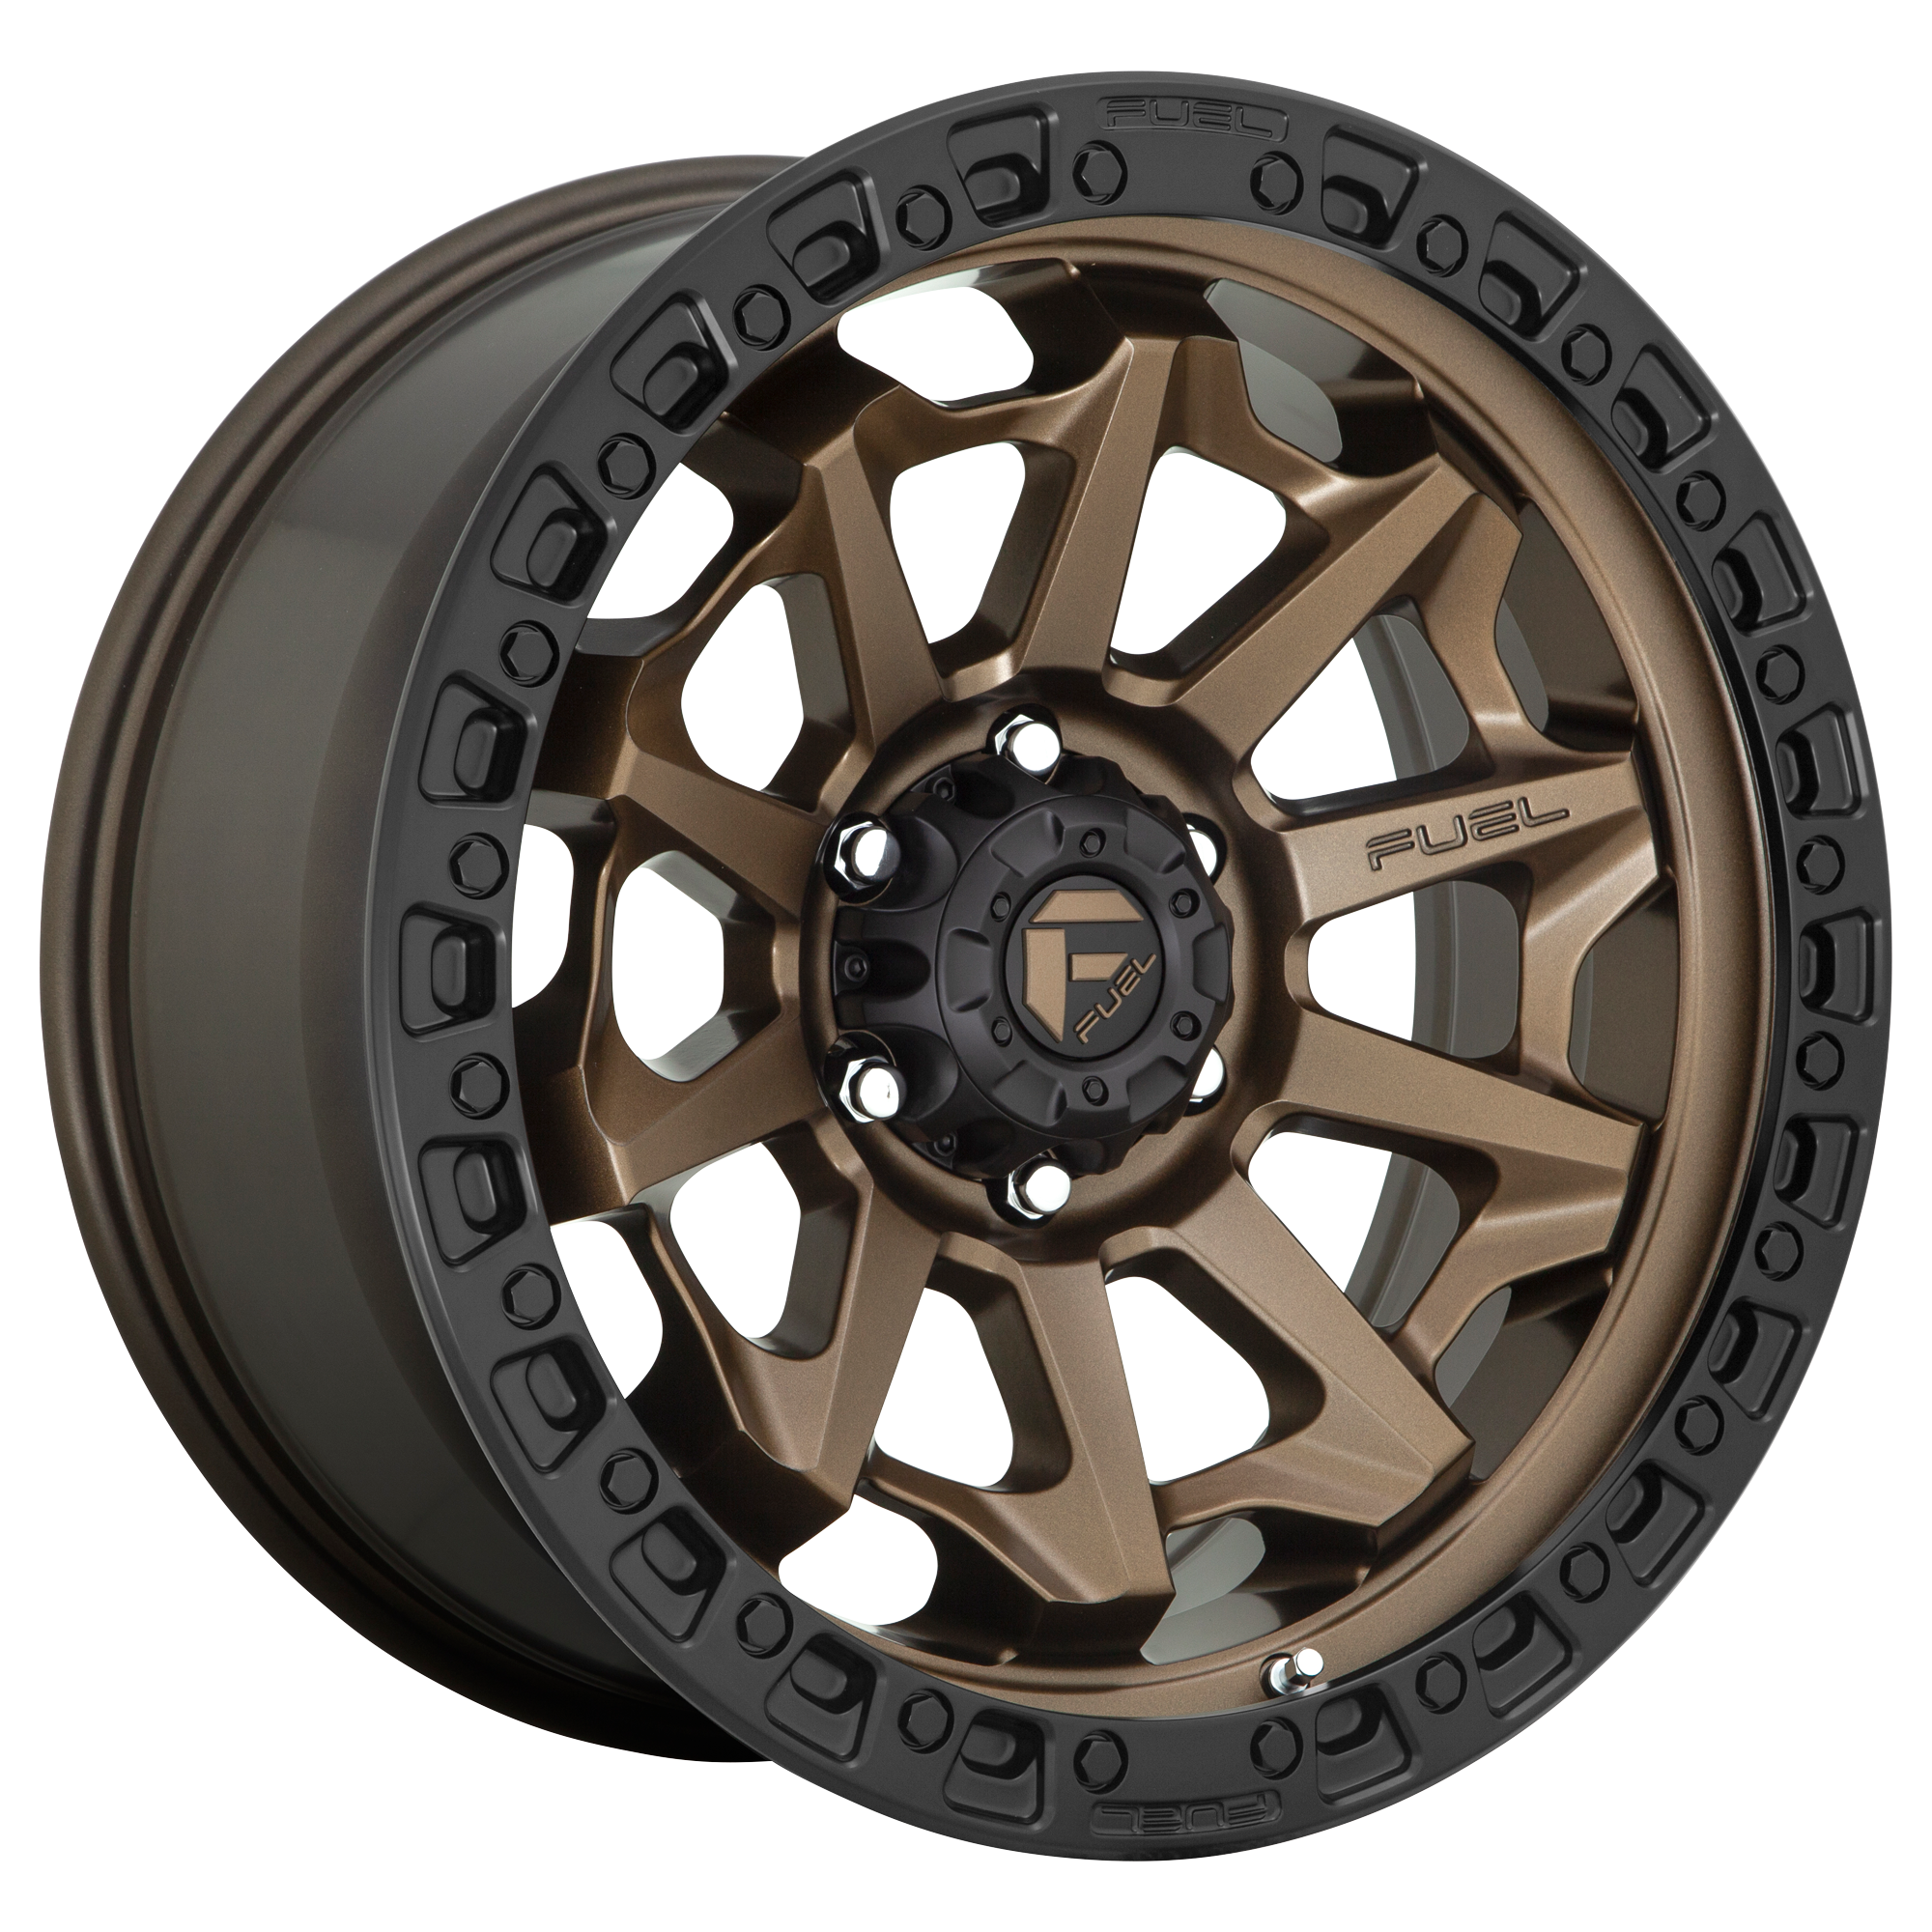 COVERT 20x9 6x139.70 MATTE BRONZE BLACK BEAD RING (1 mm) - Tires and Engine Performance